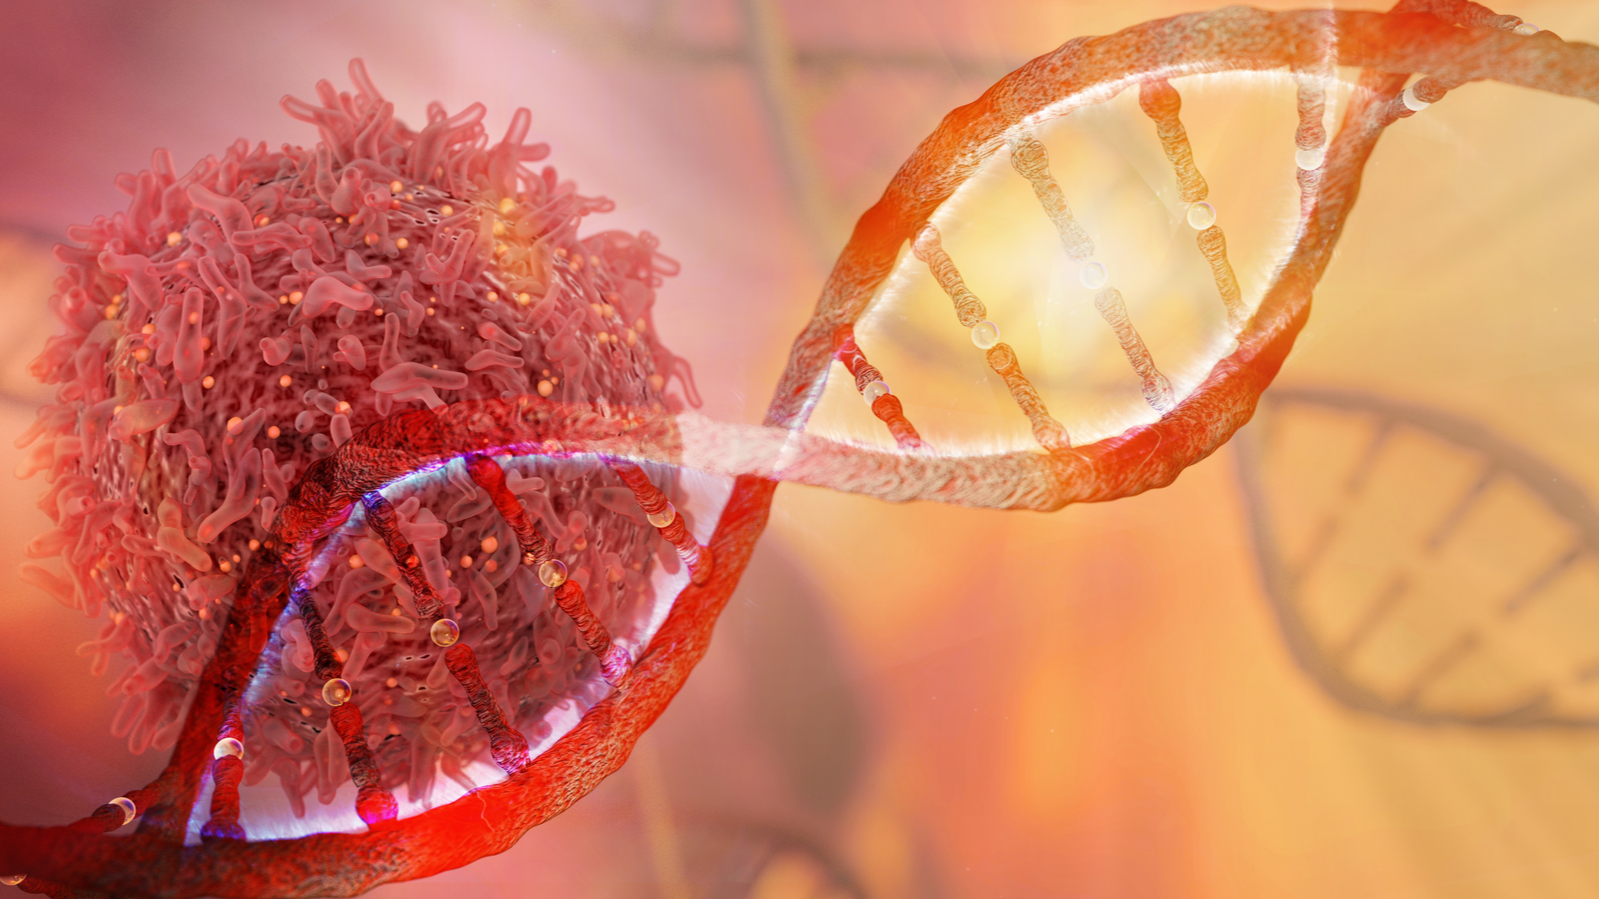 DNA strand and Cancer Cell Oncology Research Concept 3D rendering. RNAZ Stock